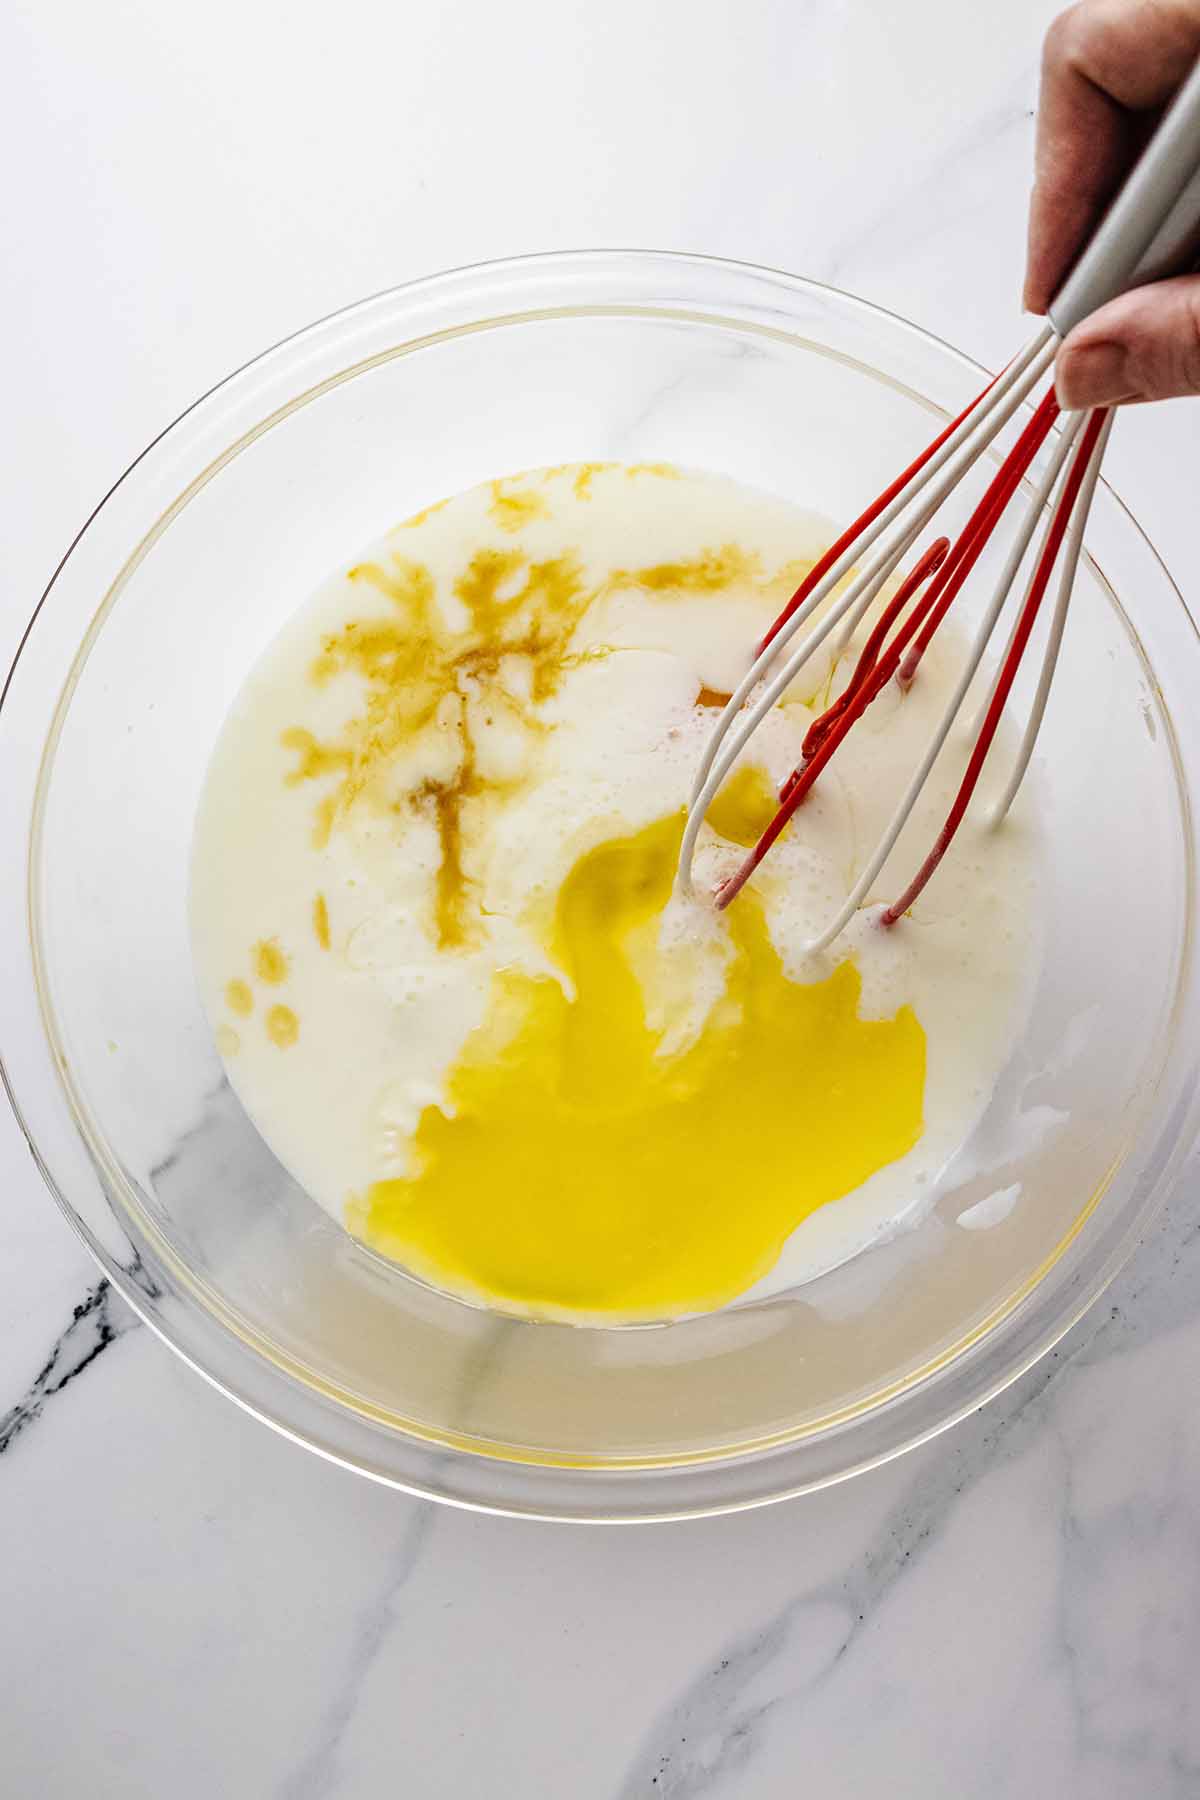 Wet ingredients in a large glass bowl on a marble countertop with a red and white whisk.